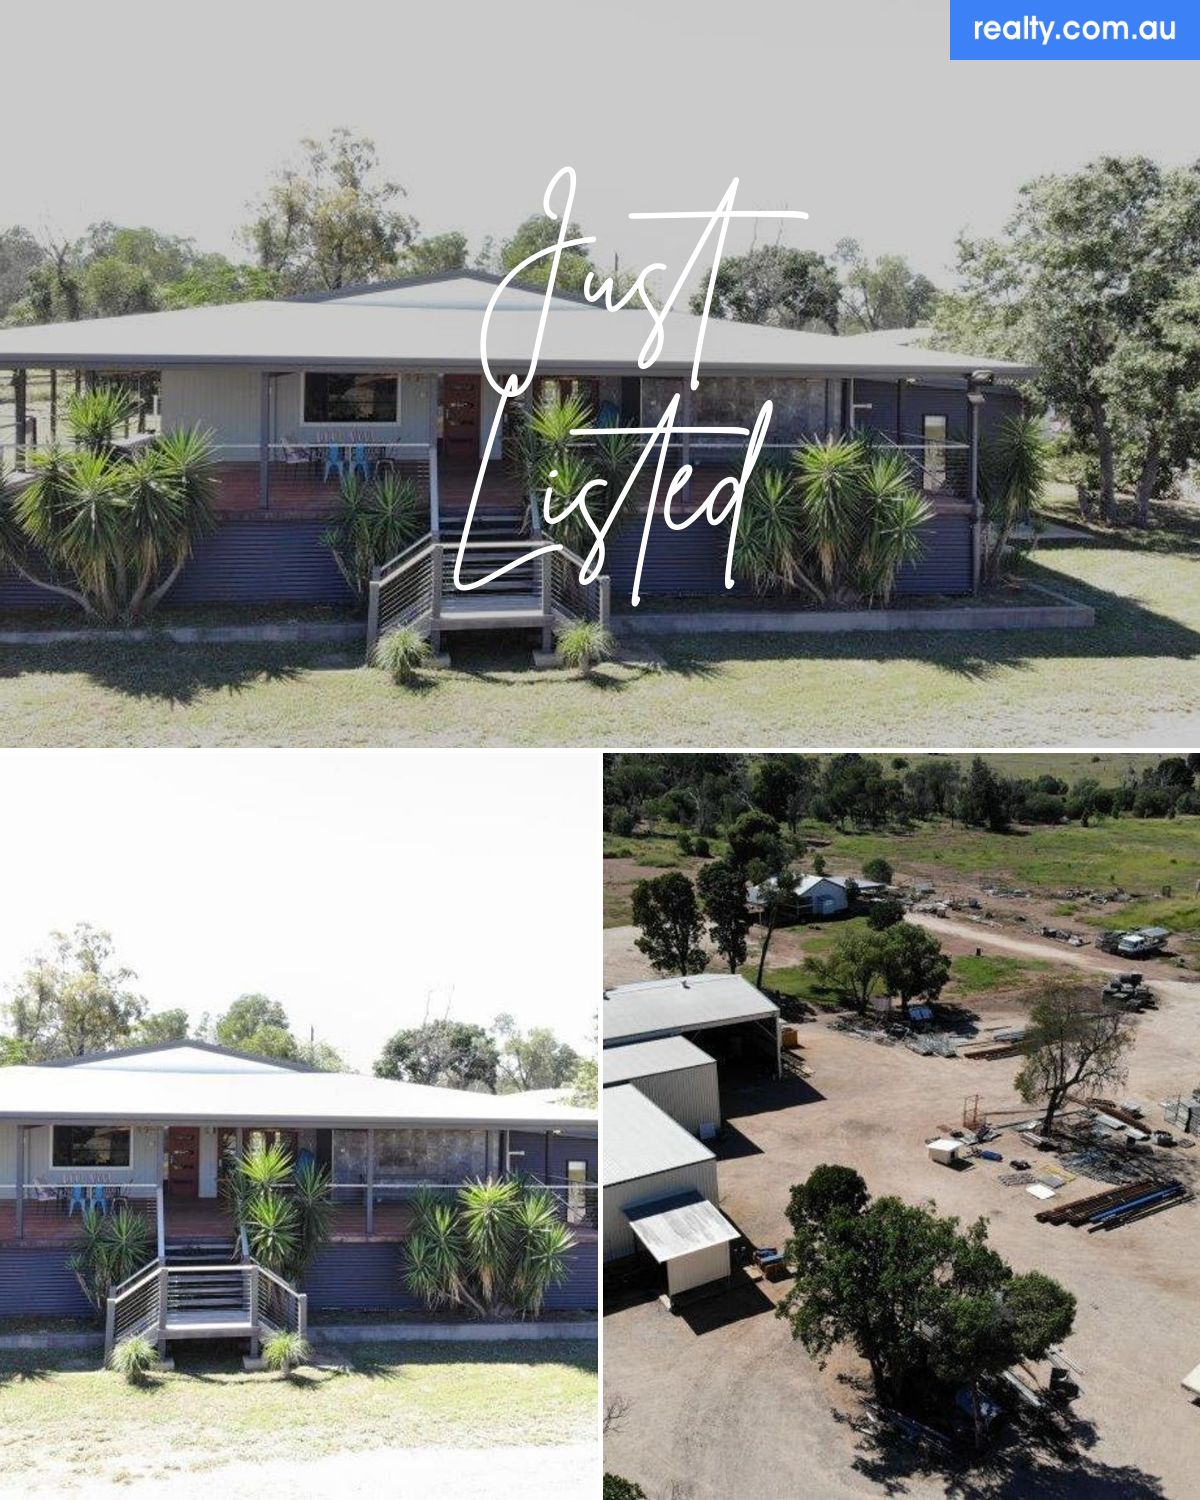 Investment Opportunity, Chinchilla, QLD 4413 | Realty.com.au